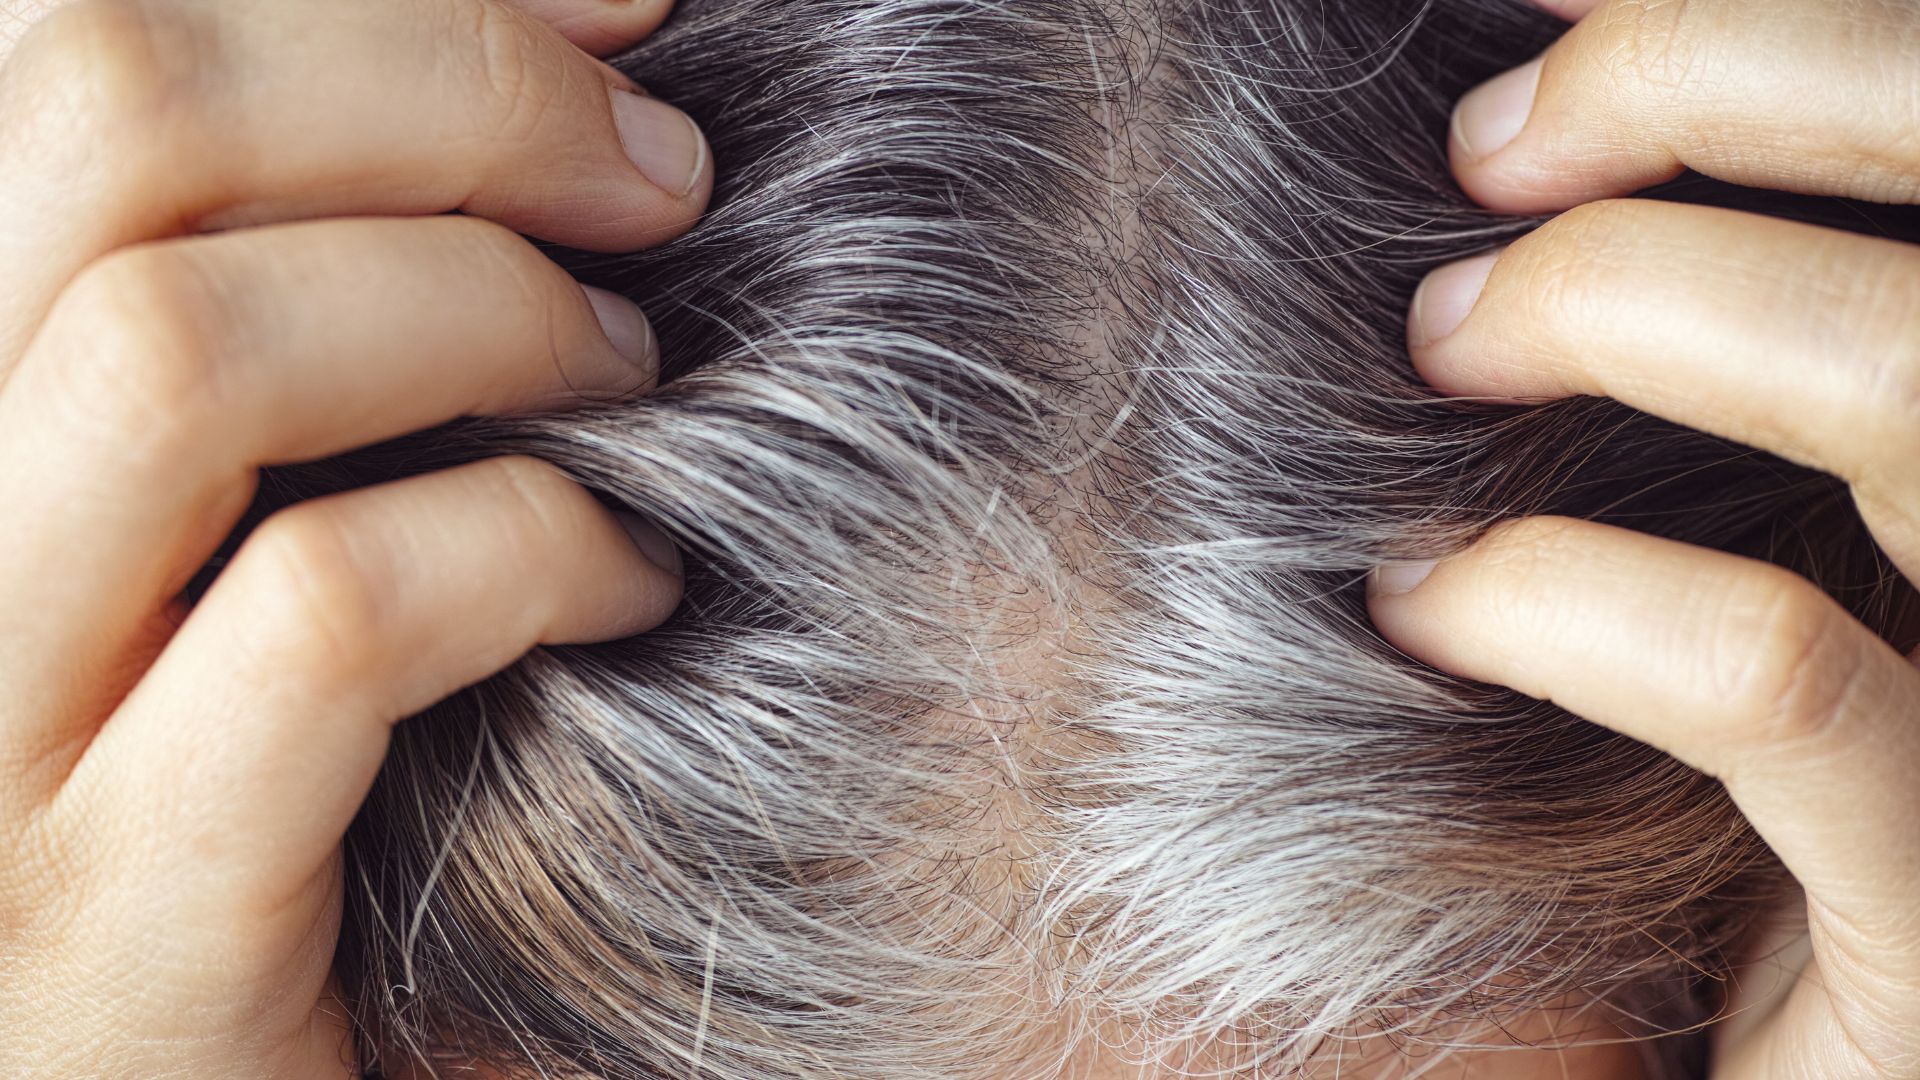 Person with gray hair grabbing their scalp .